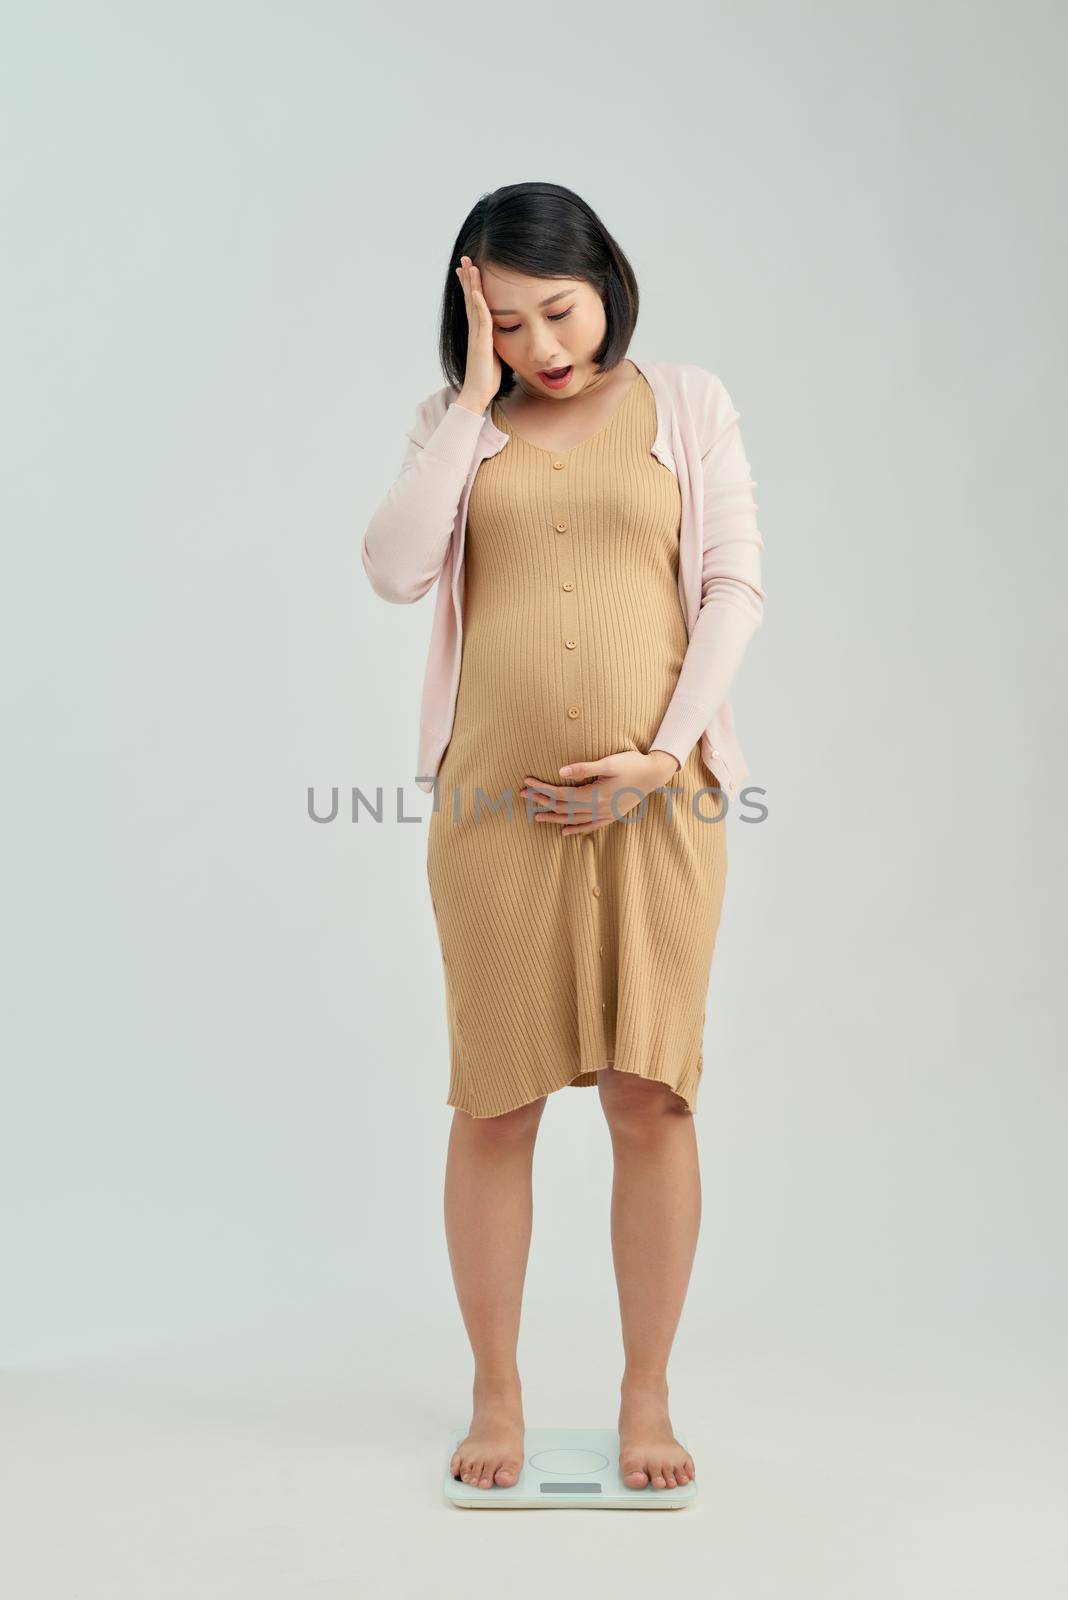 Pregnant woman standing on scales at home. Pregnancy weight gain concept by makidotvn